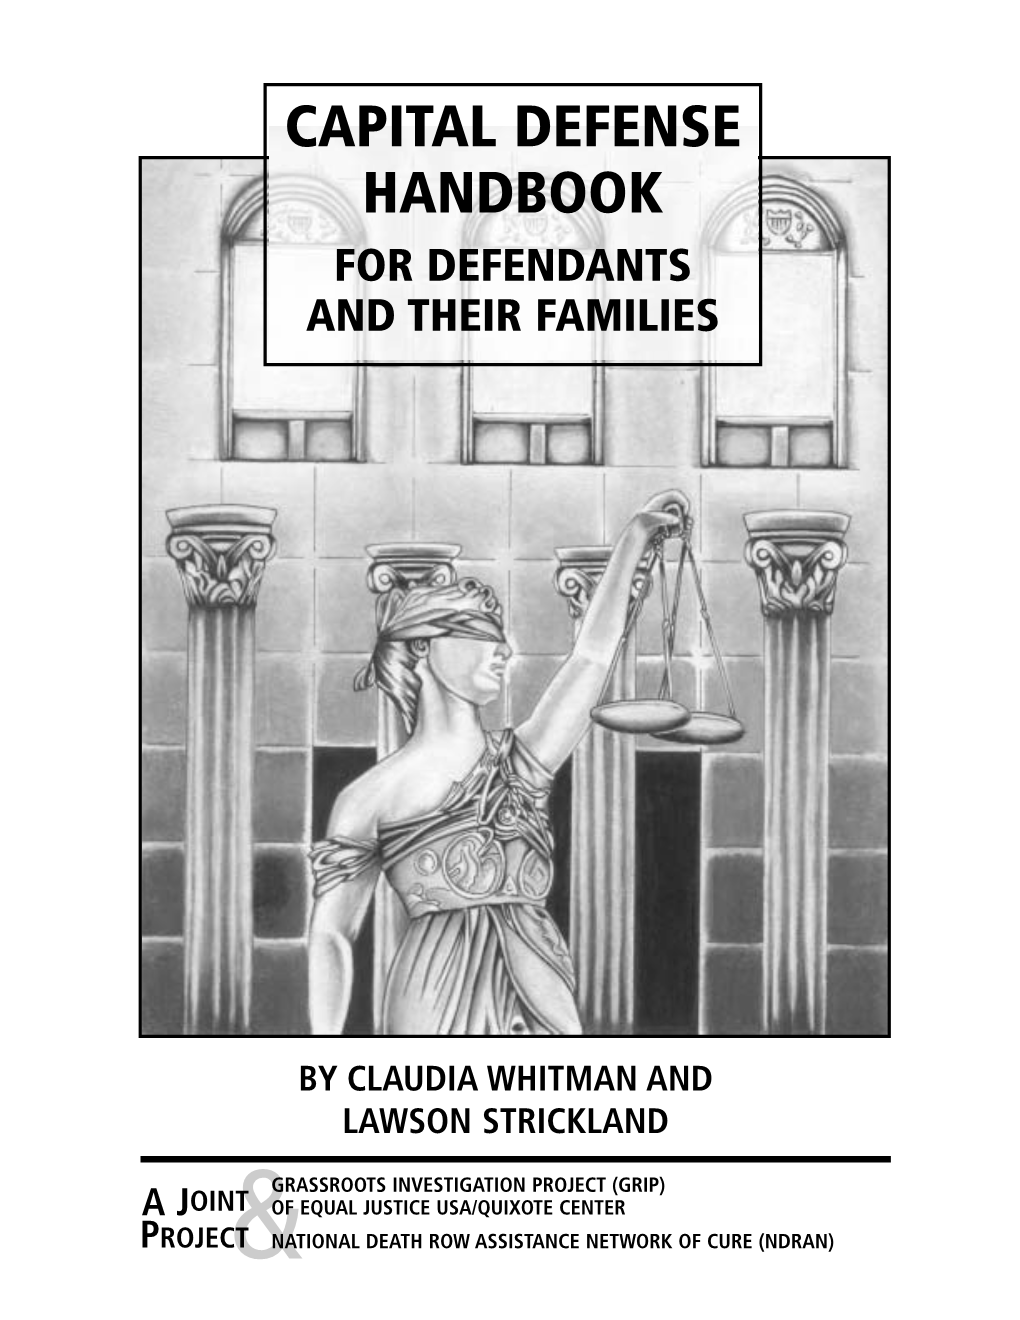 Capital Defense Handbook for Defendants and Their Families